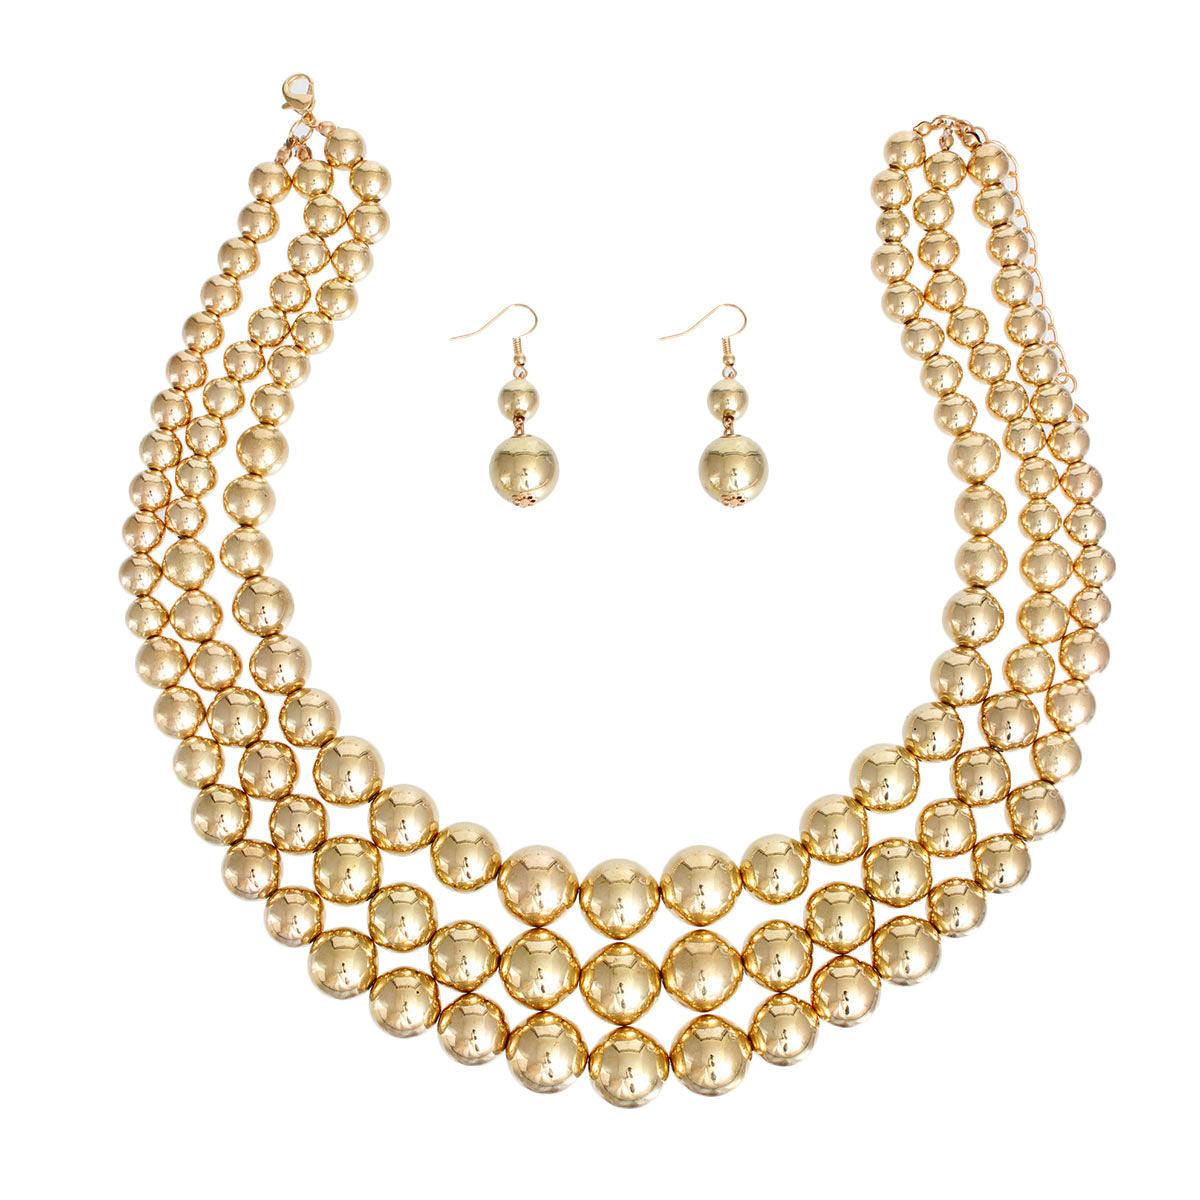 Faux Pearl 3 Layer Metallic Gold Necklace with Earrings